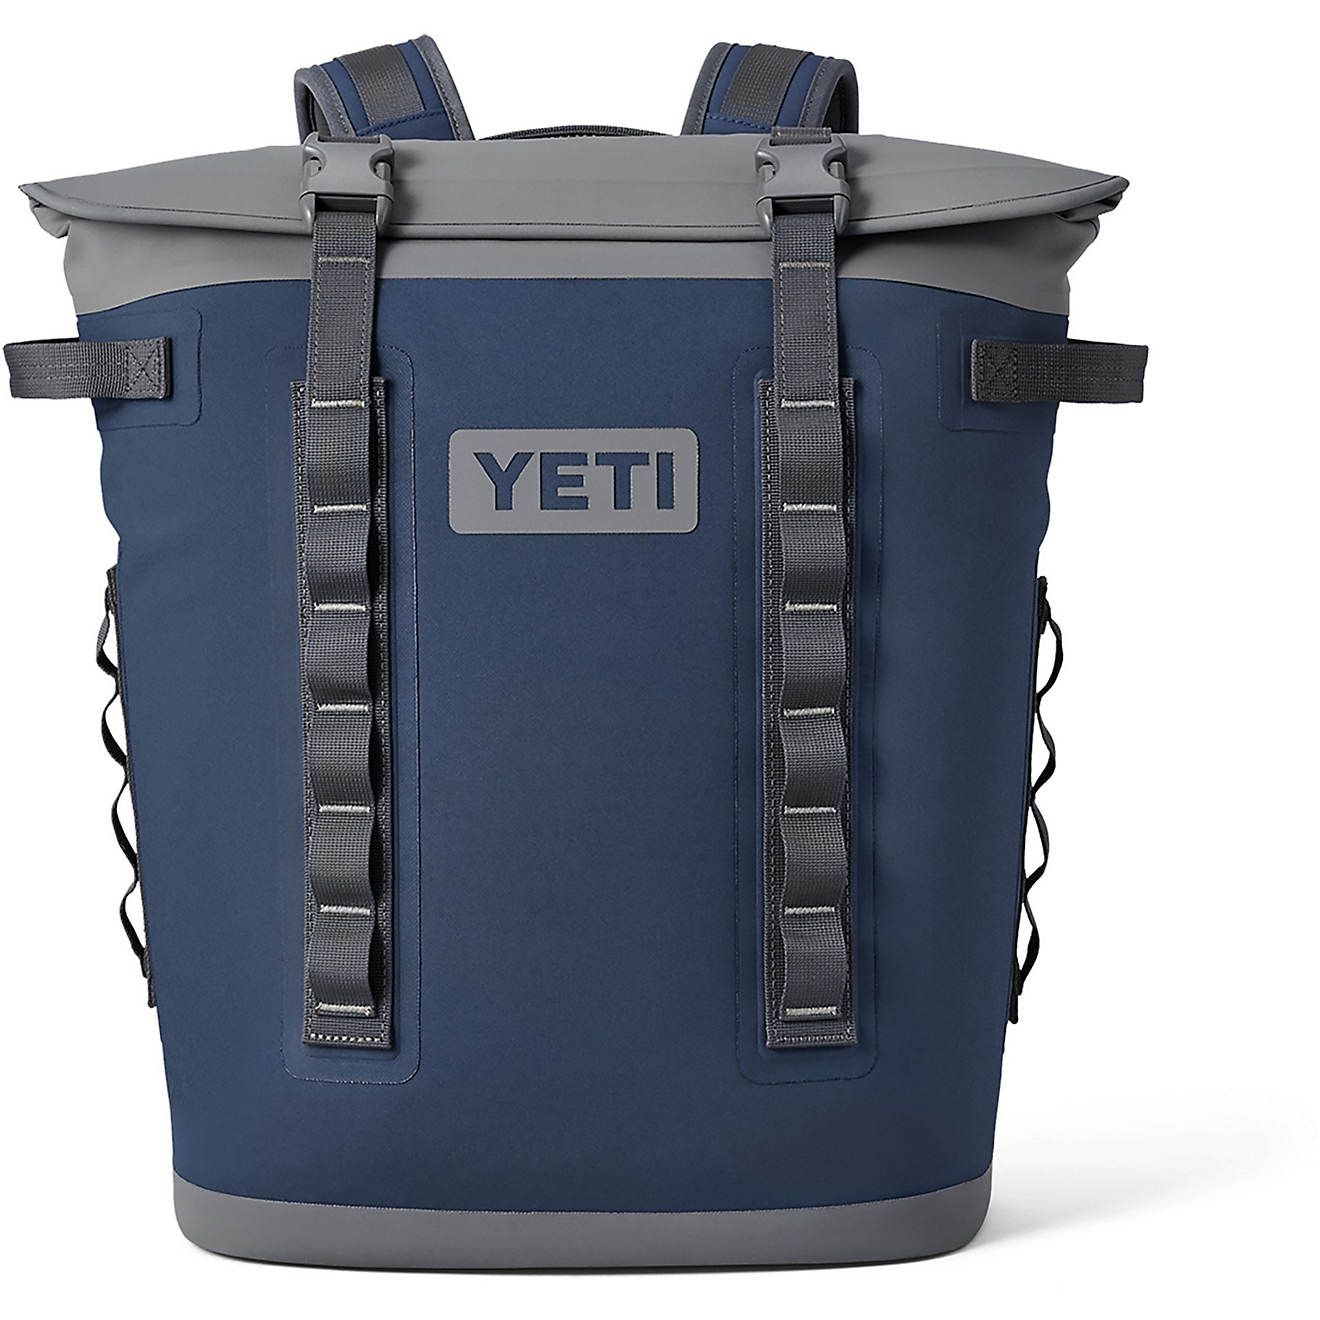 YETI Hopper M20 Backpack Cooler | Academy | Academy Sports + Outdoors